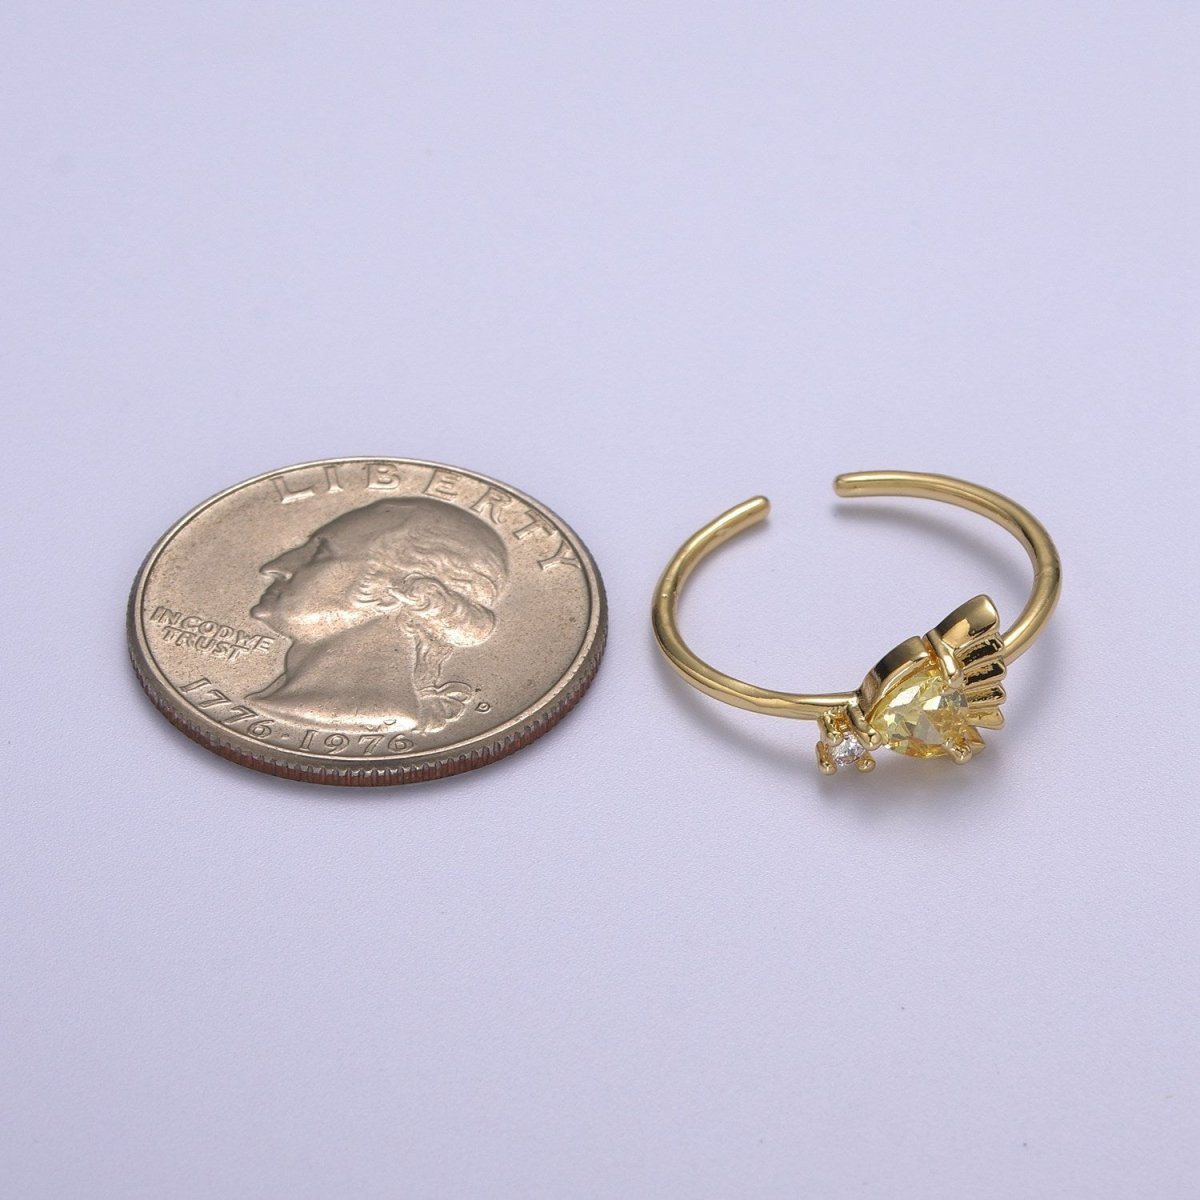 Dainty Gold Fish ring, Gold Mini Animal Pet Ring, Dainty Stackable Rings, Open Adjustable Ring Cz S-180 - DLUXCA